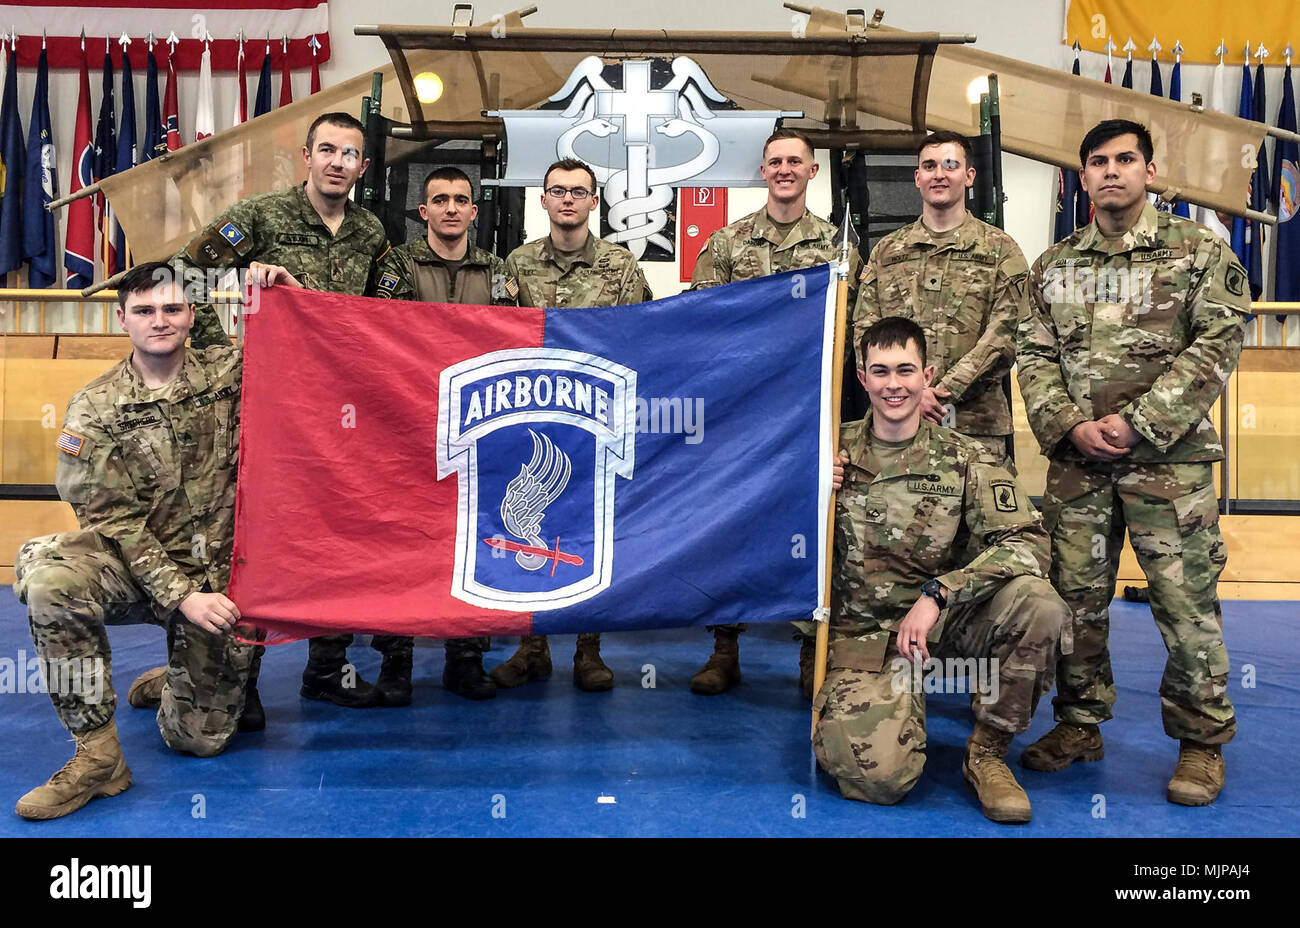 Two Allied Soldiers from Kosovo worked with the six medics from the 173rd Airborne Brigade to earn the Expert Field Medical Badge during testing at Grafenwoehr, Germany.  Those receiving the EFMB were Sgt. Jacob Shepherd, Cpl. Besart Ejupi, Cpl. Kushtrim Hyseni, Sgt. Brenden Lee, Spc. Kyle Daron, Spc. Matthew Holtz, Sgt. Angel Gomez  and Pfc. Jonah Petrick. Armed Forces and civilians displaying courage bravery dedication commitment and sacrifice Stock Photo